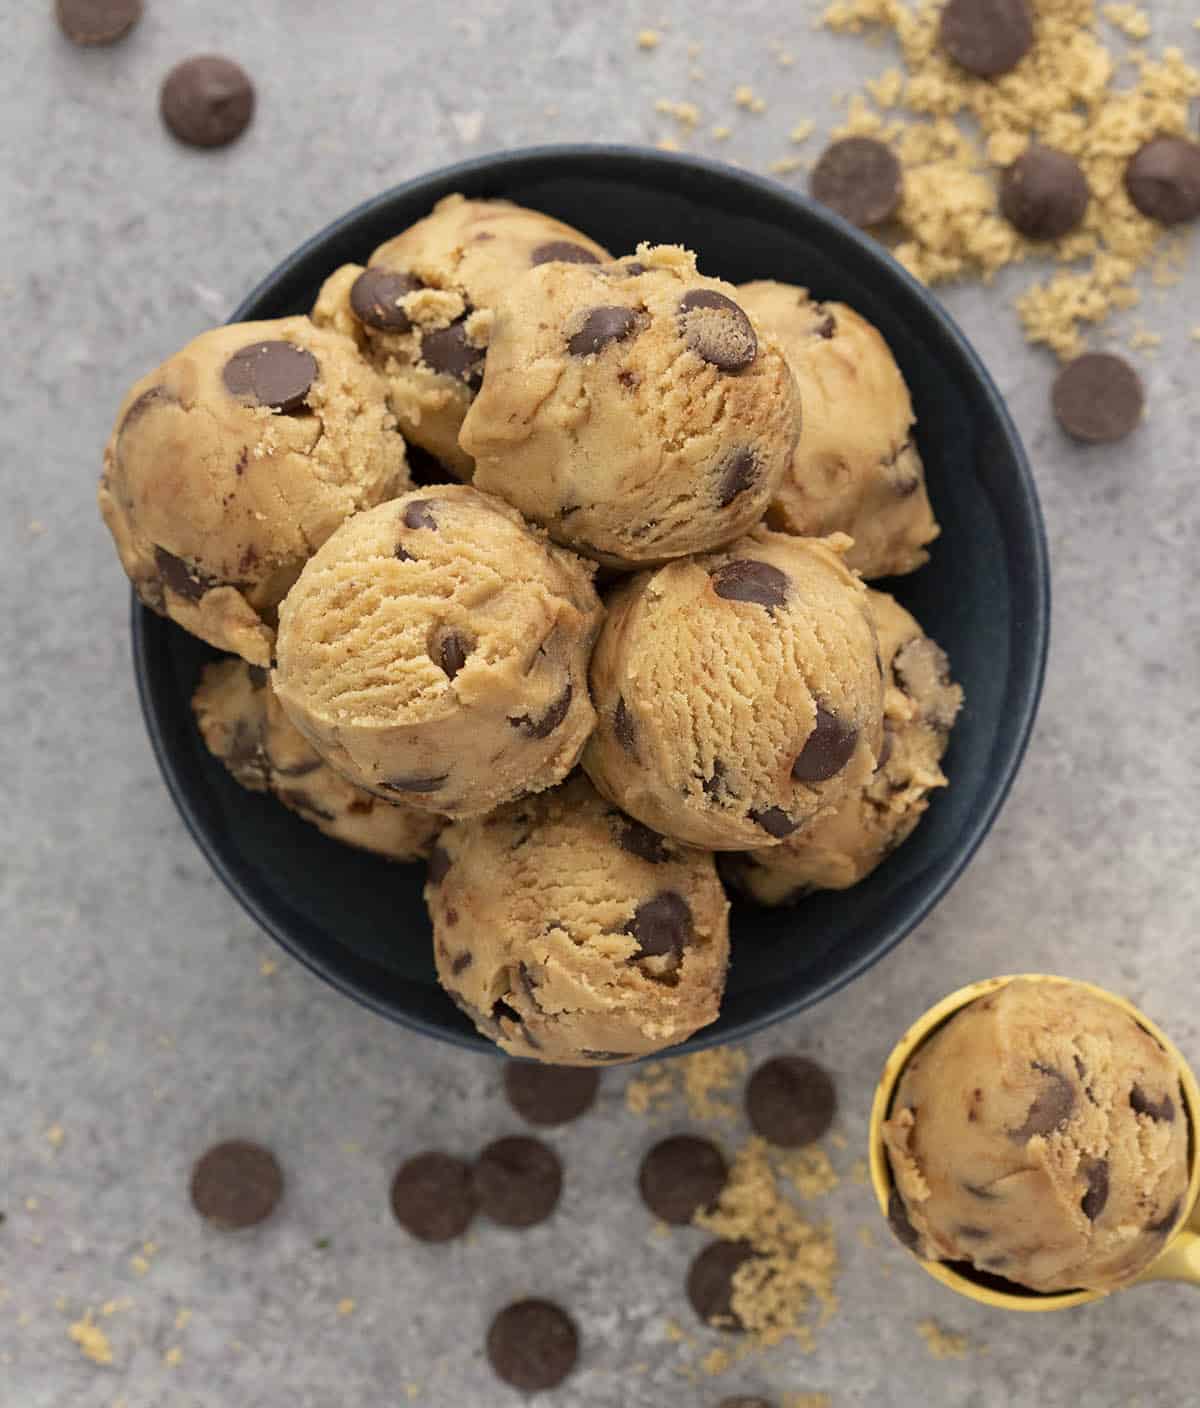 Overhead view of multiple scoops of cookie dough in a navy bowl.